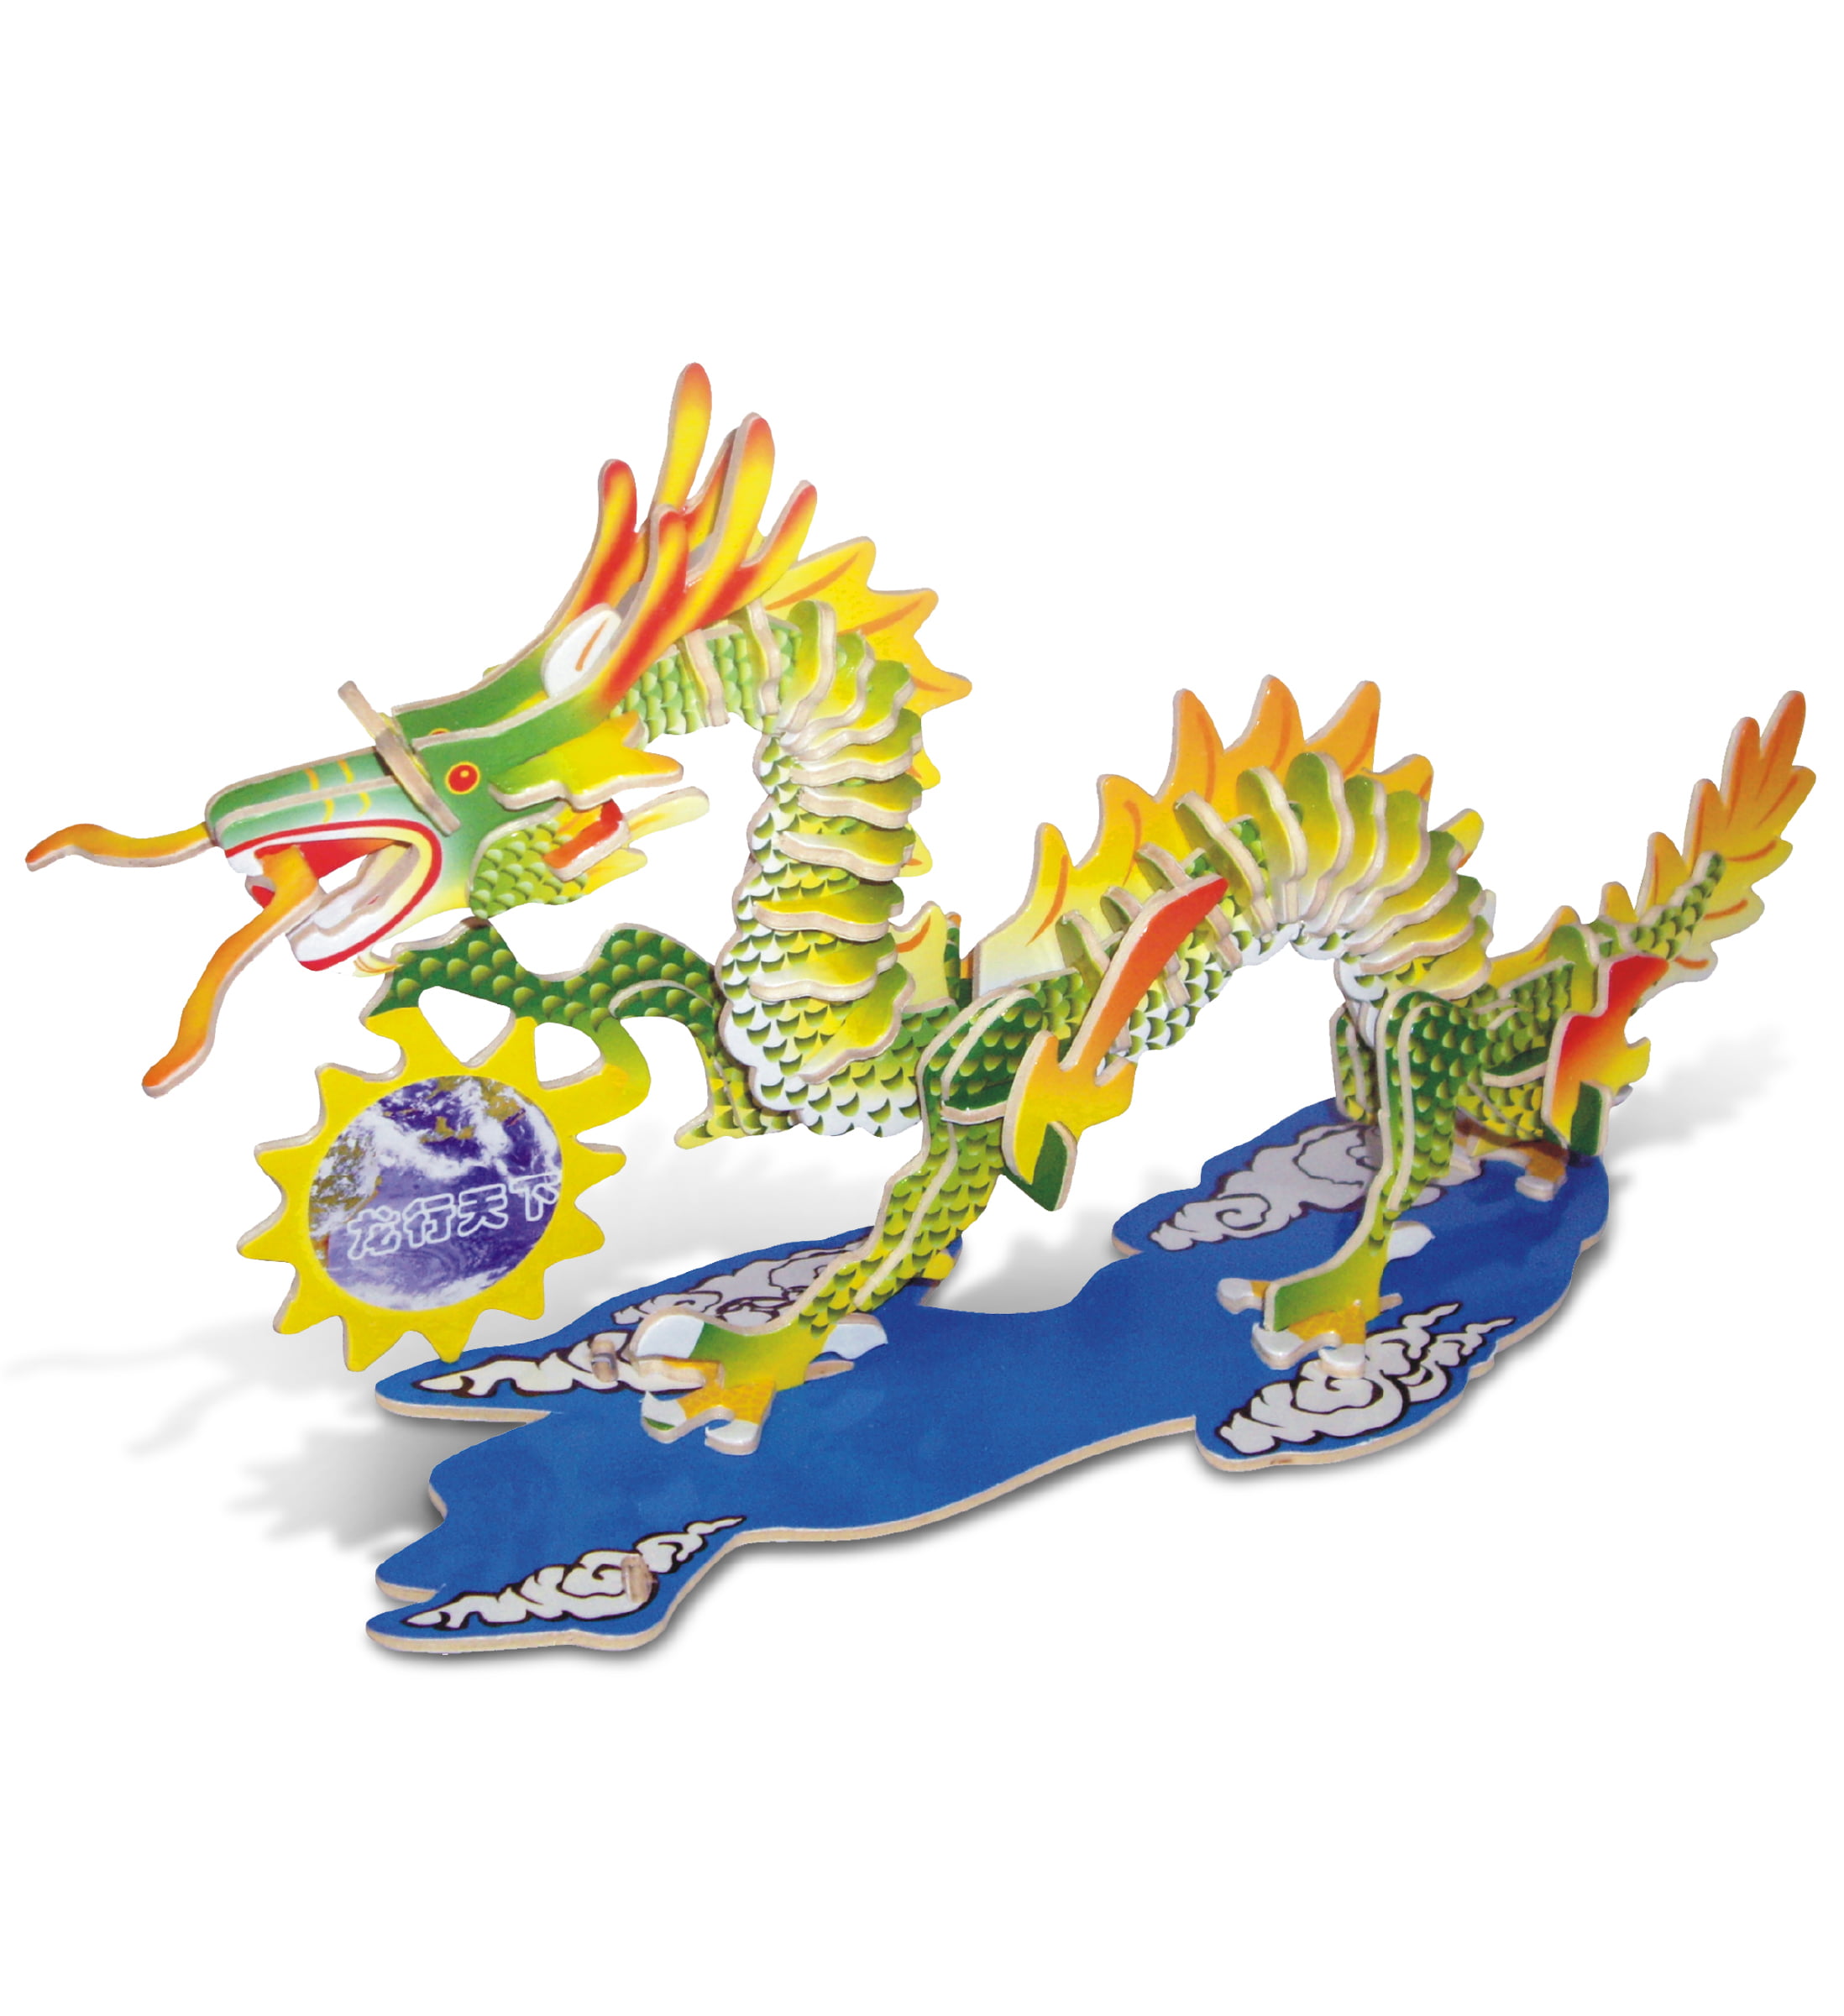 3D Puzzle Cool Dragon Model DIY Assemble Miniature Educational Toy Novelty Gift 